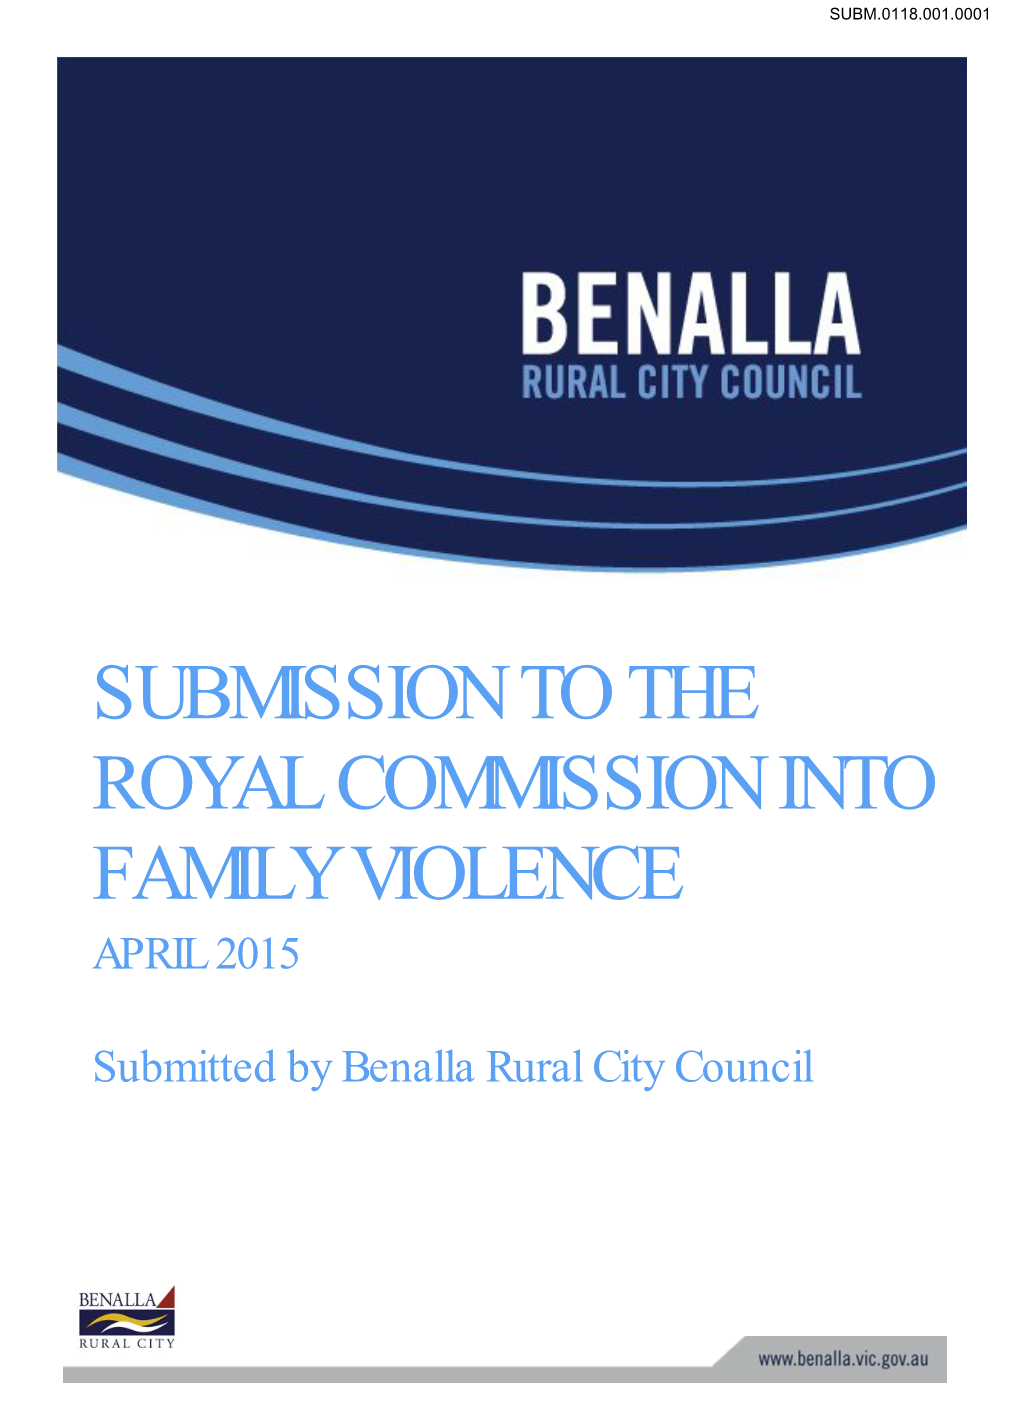 Submission to the Royal Commission Into Family Violence April 2015